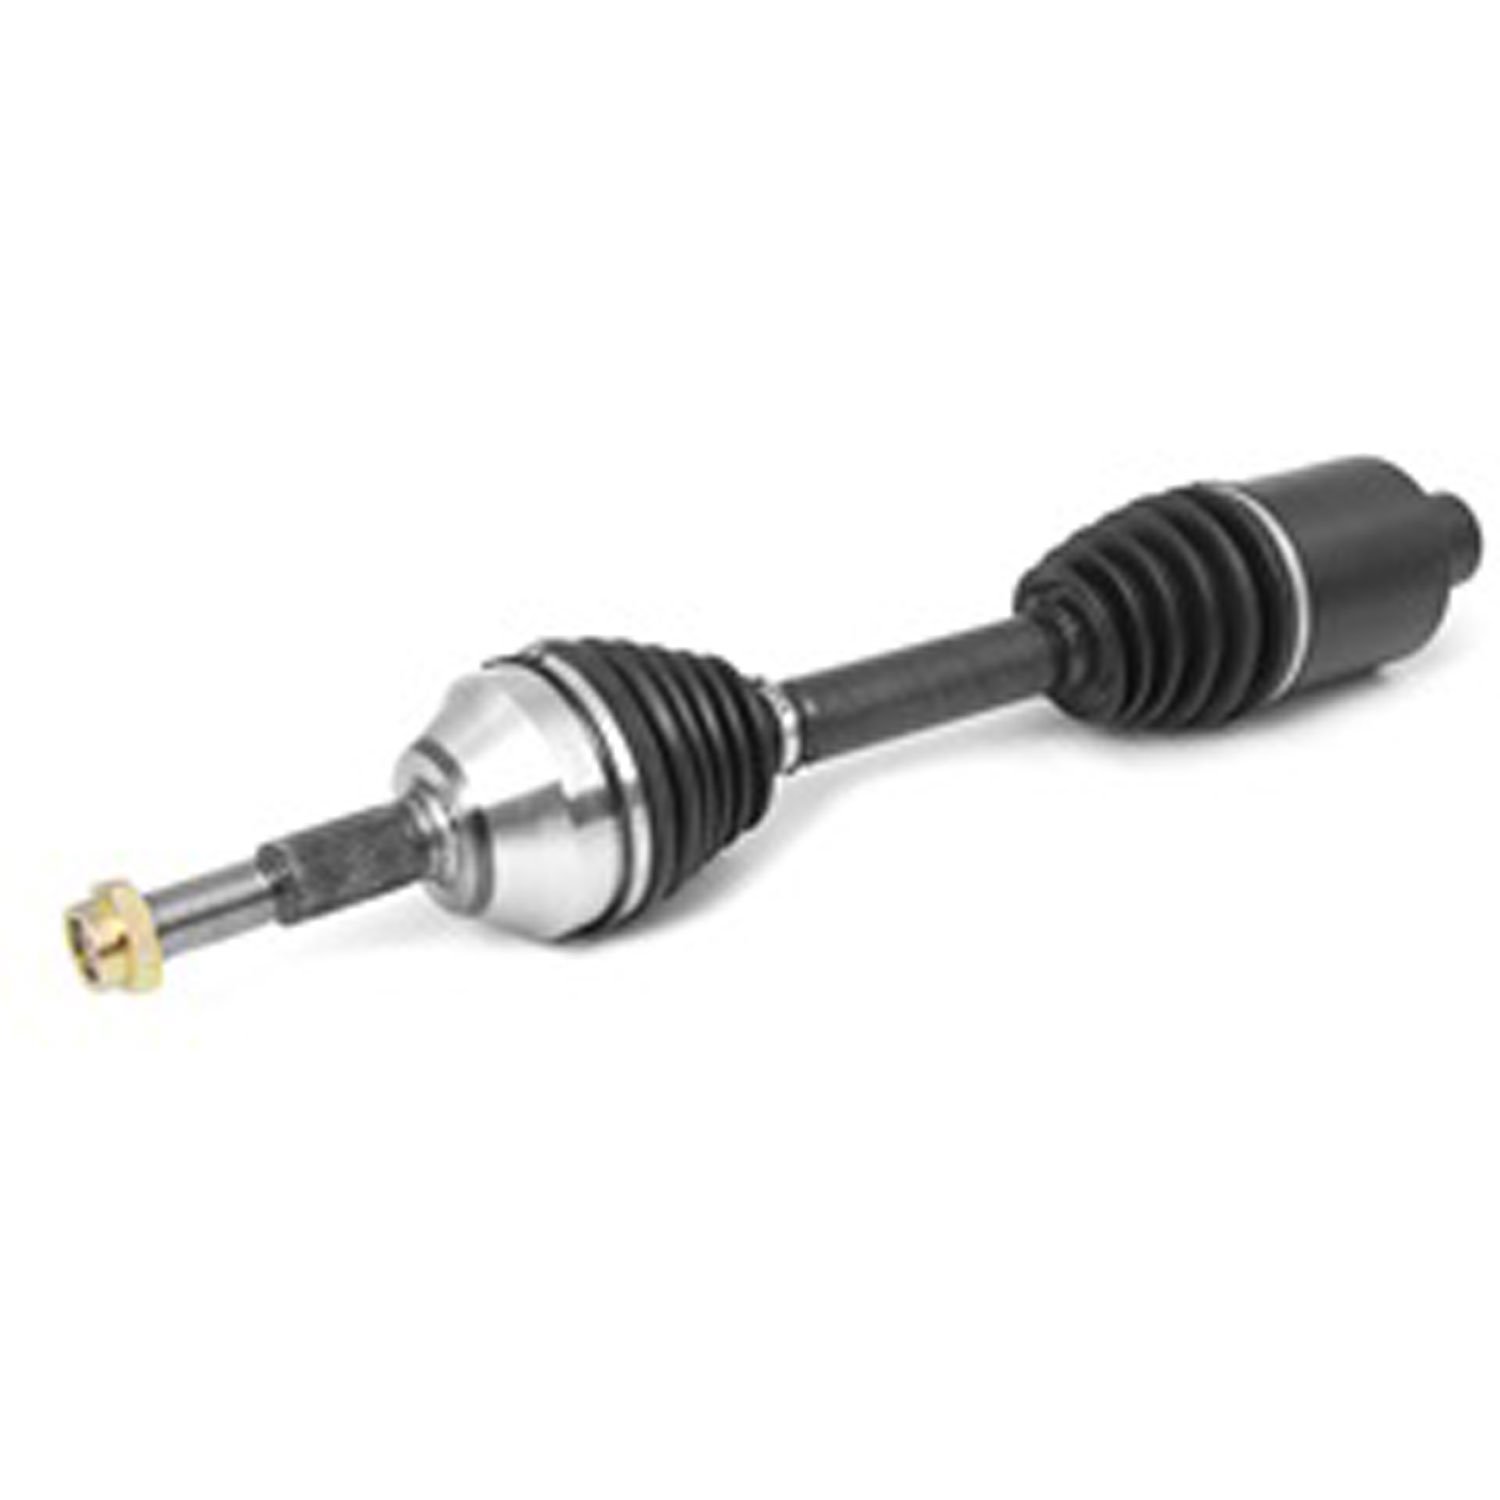 This front axle shaft assembly from Omix-ADA fits